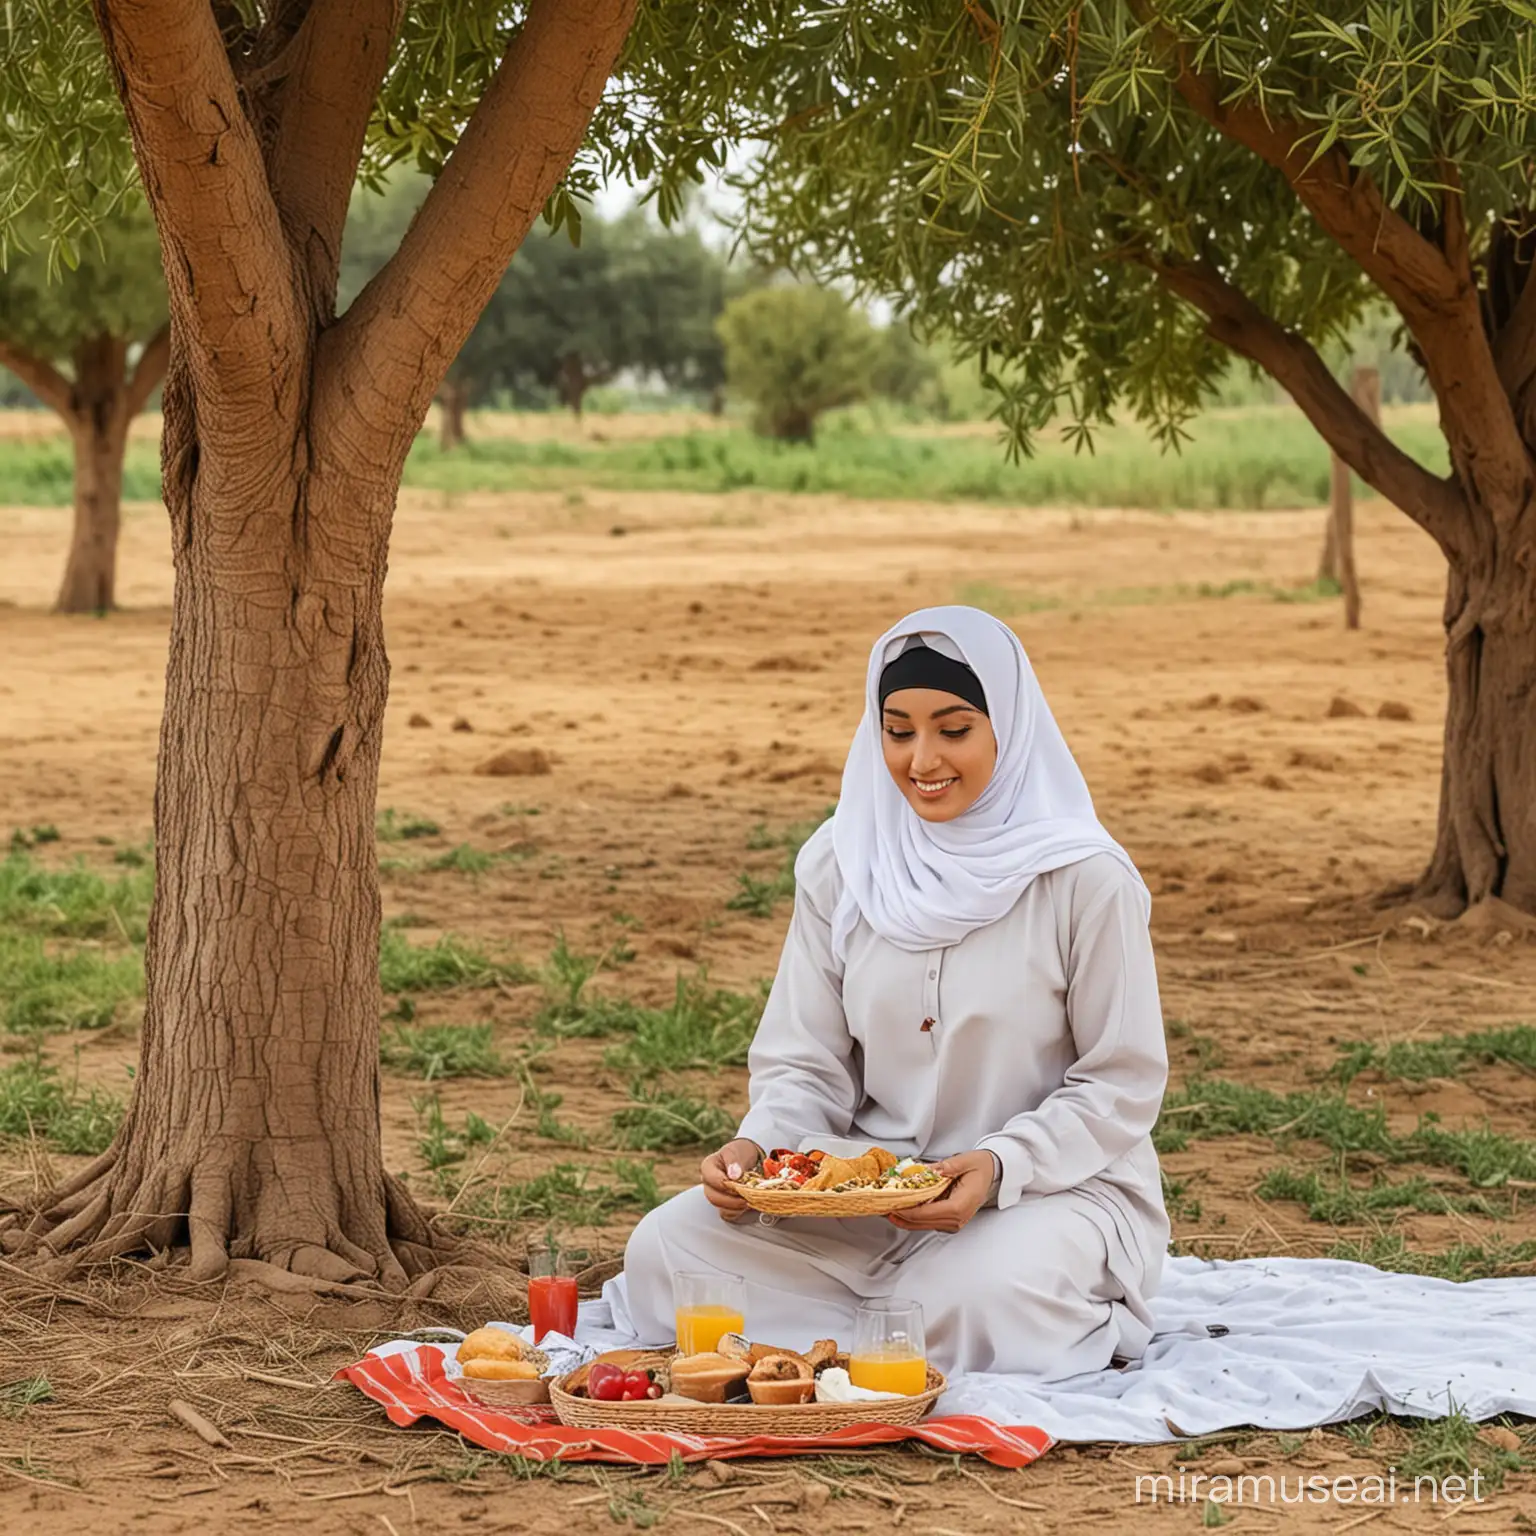 Egyptian hijab woman having lunch under the tree in the farm field